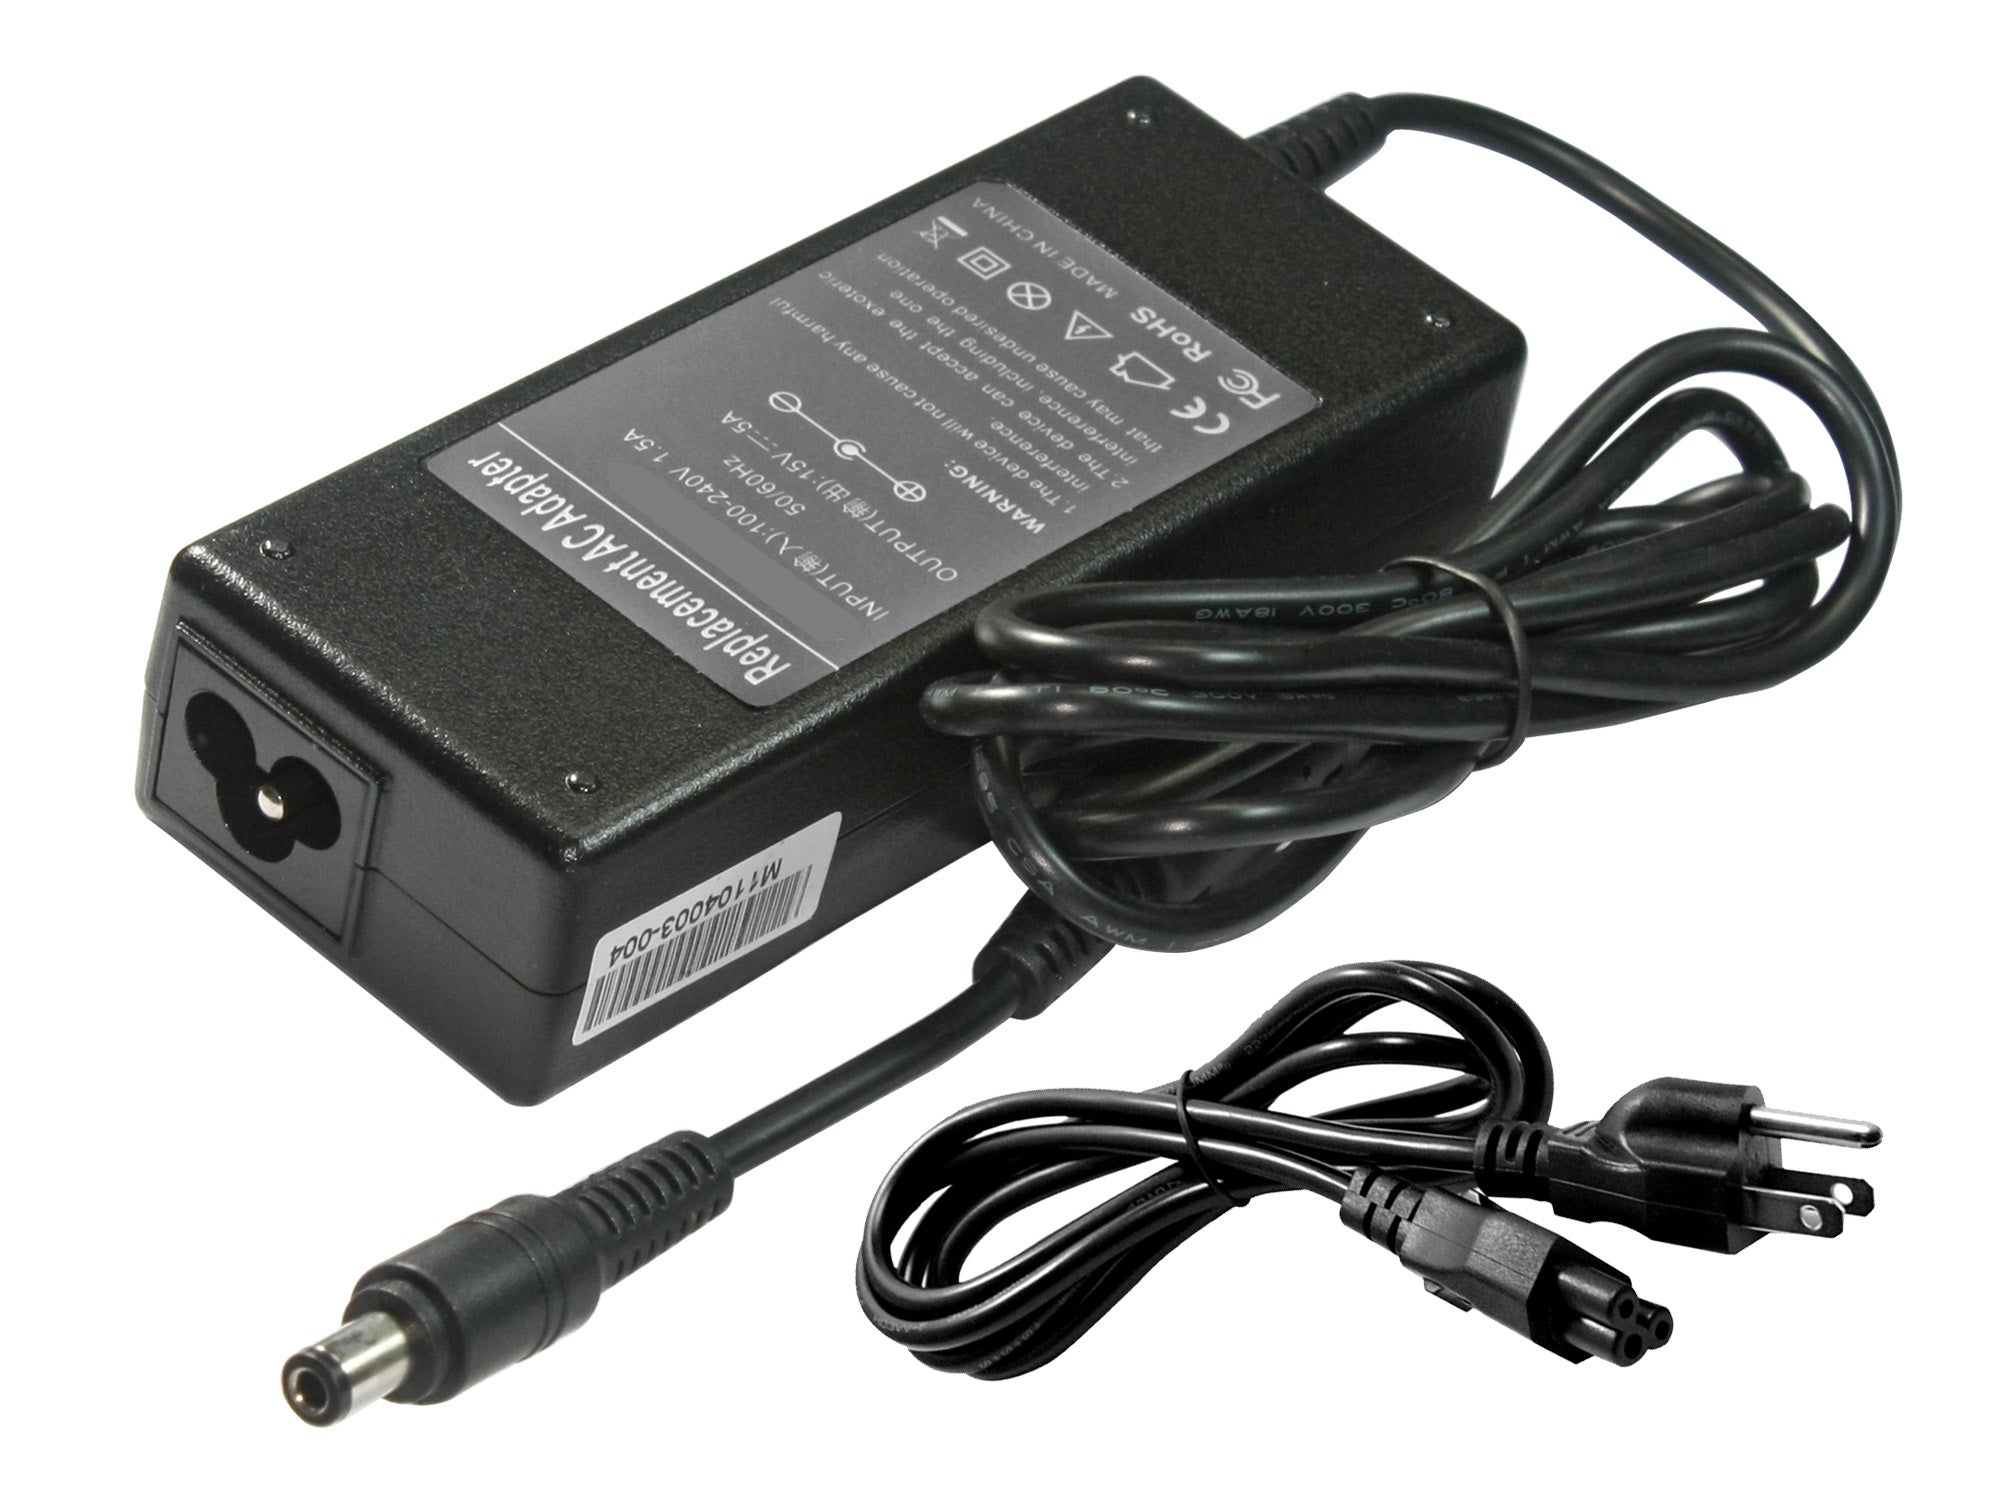 Compatible Replacement Toshiba Satellite A105-S4001 AC Adapter 75Watt 15V 5A.